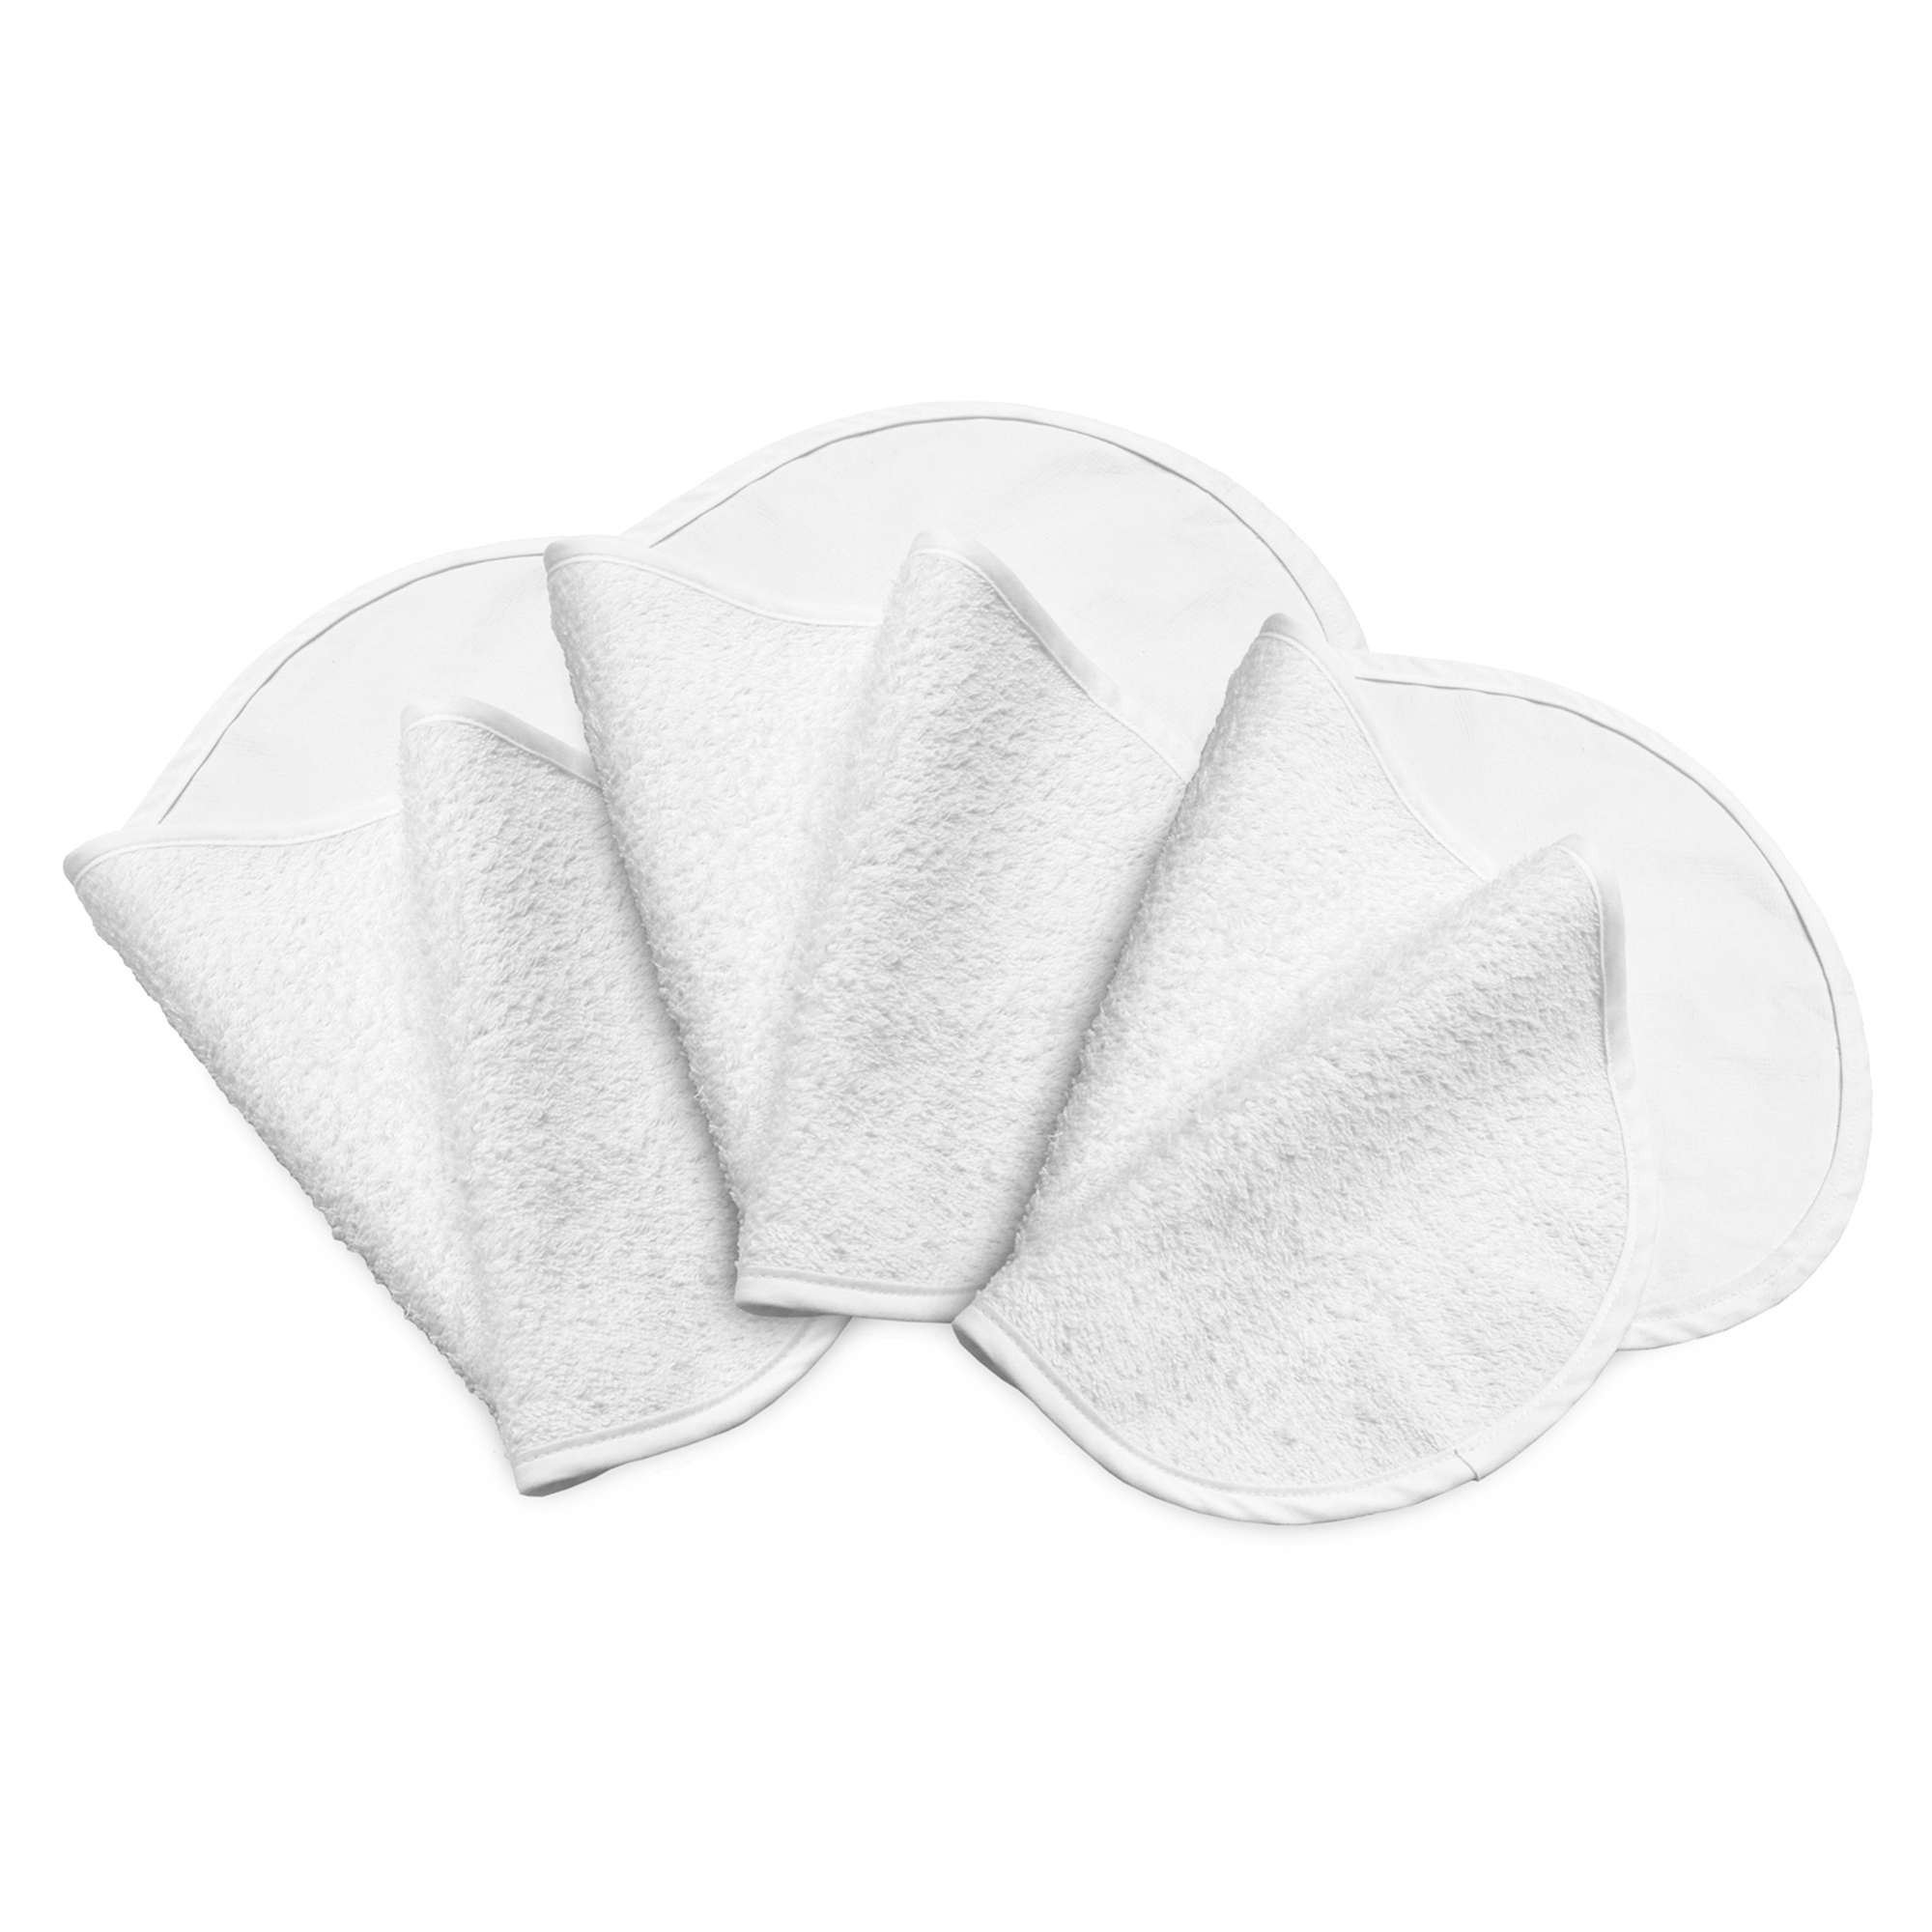 Boppy Changing Pad Liners, Pack of 3, White, Waterproof Backing, Easier Diaper Changes, Machine Washable - image 1 of 8